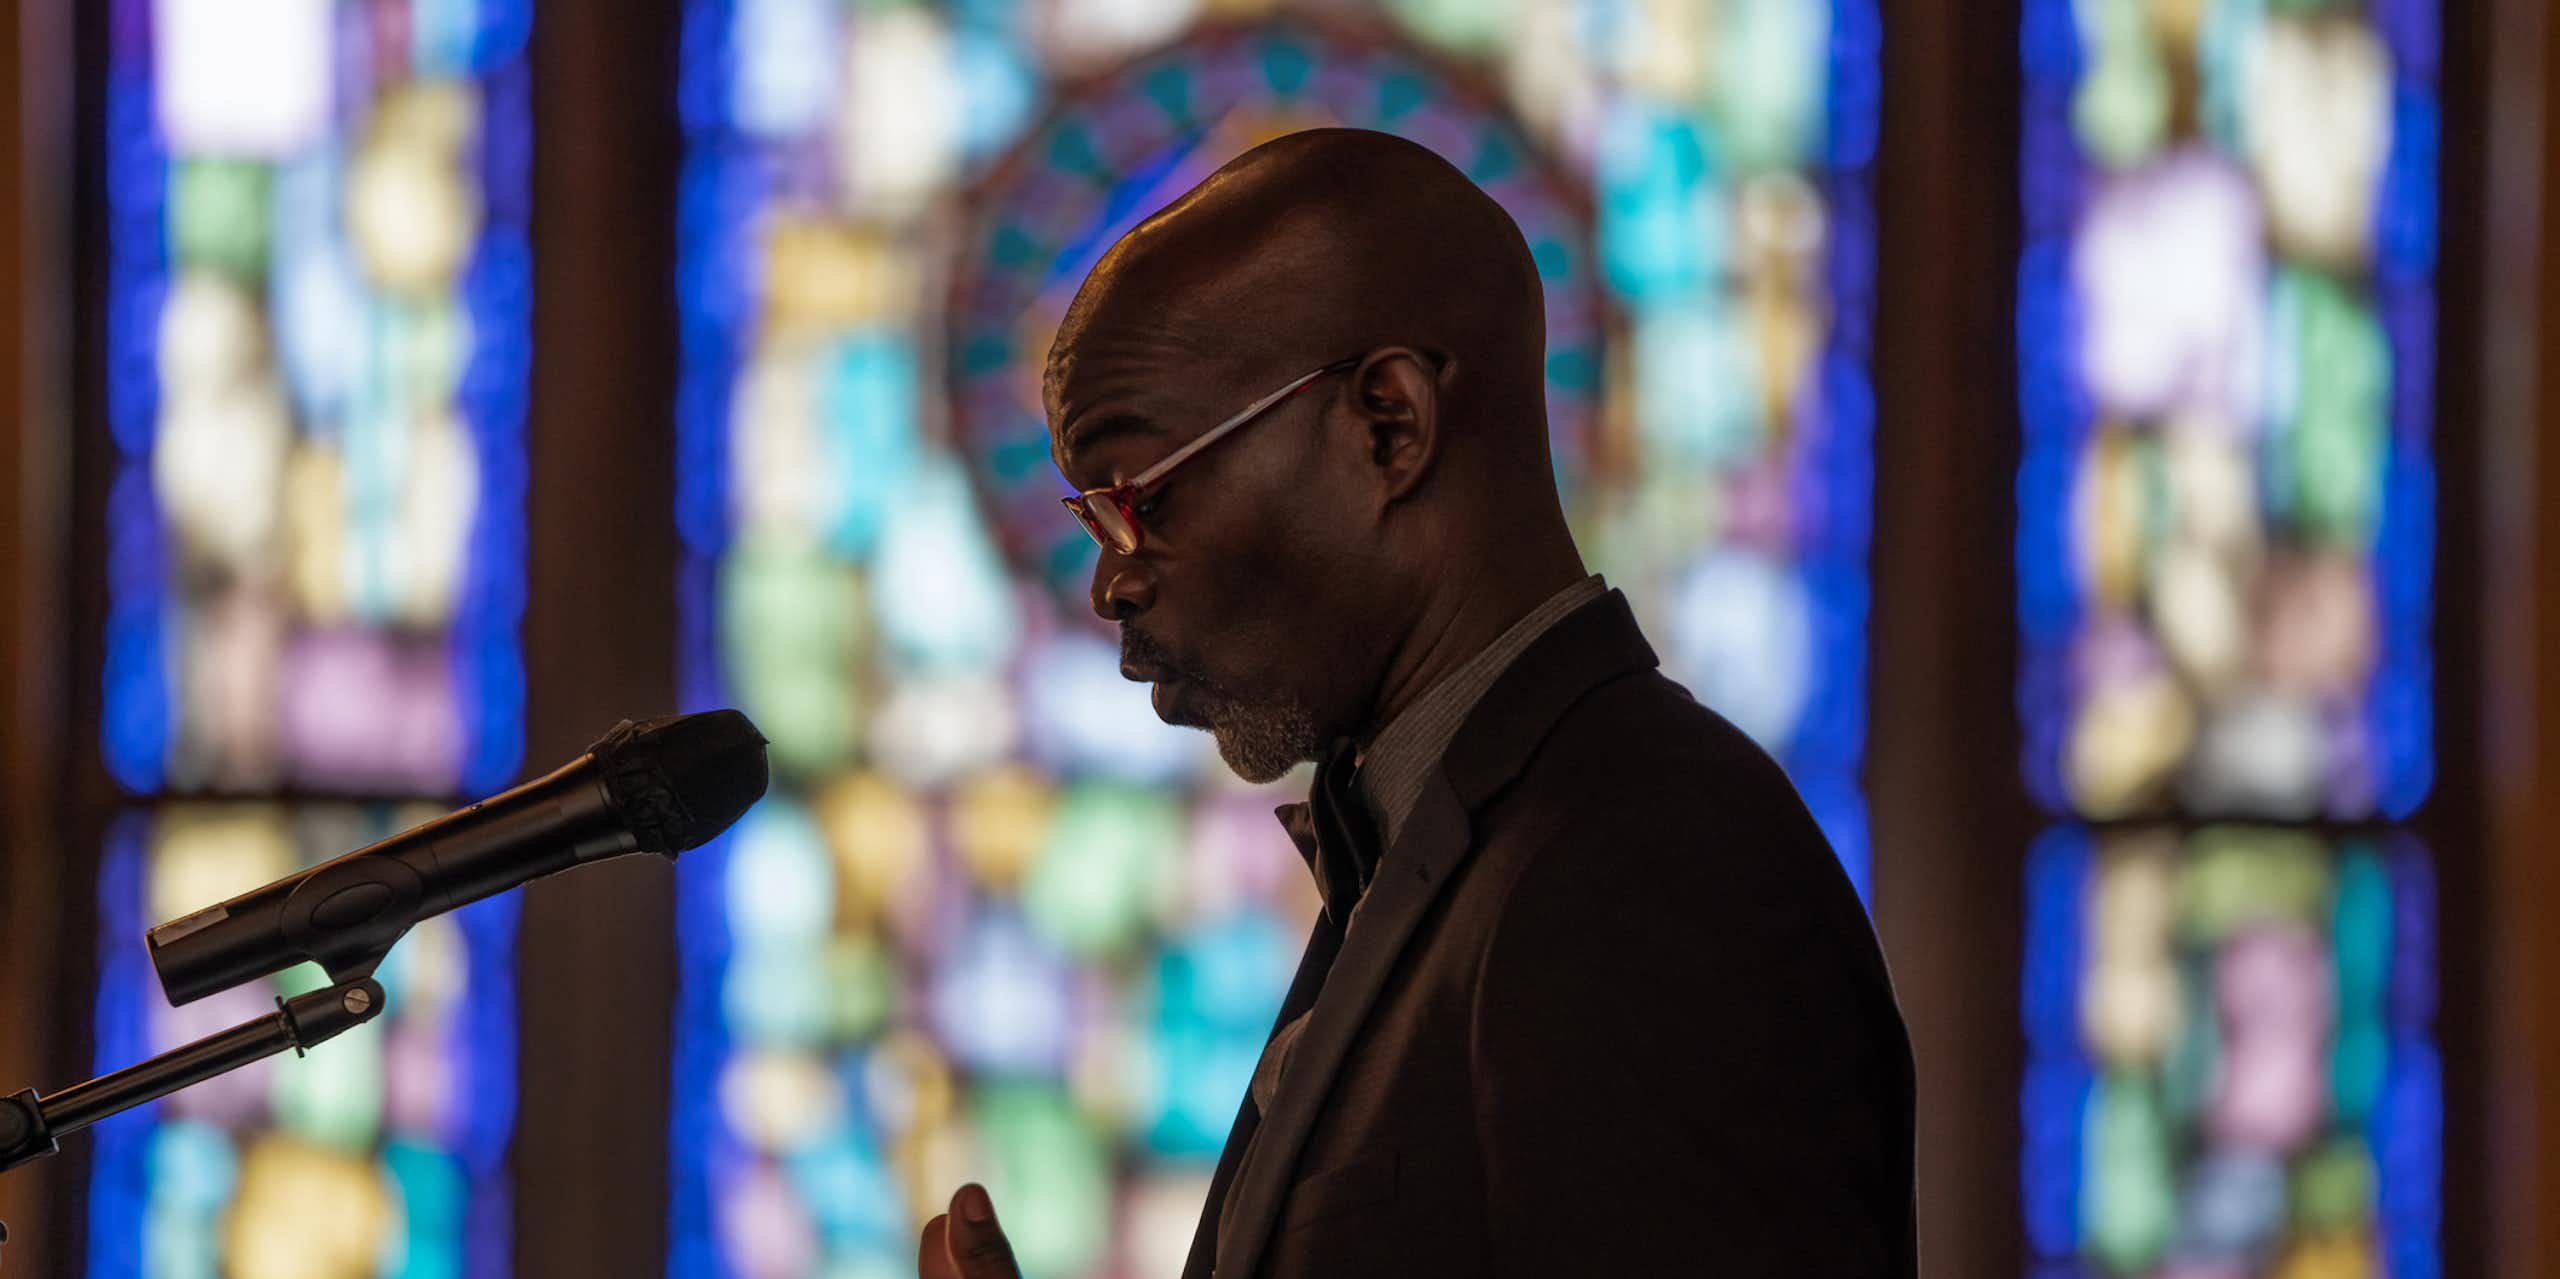 A Black man in glasses and a suit looks down as he speaks into a microphone, standing in front of stained glass windows.